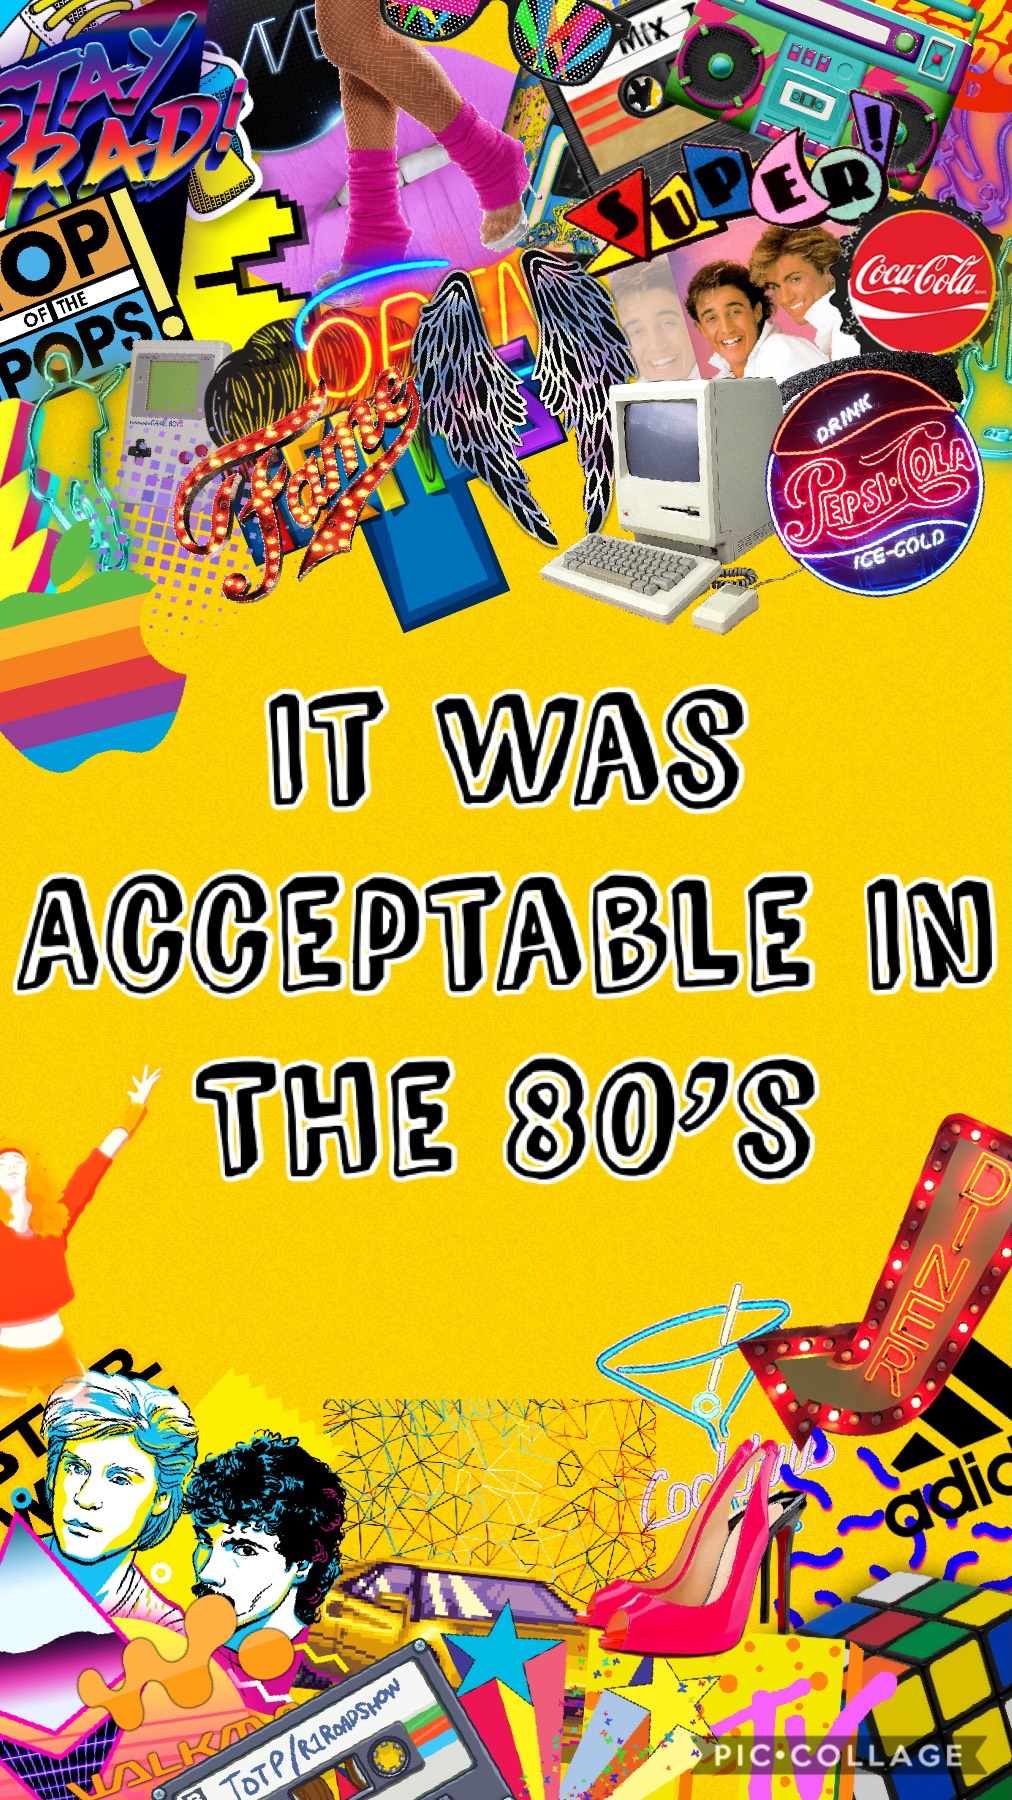 -Tap If You Love The 80’s!-

Even though I wasn’t born then, since a young age I’ve been in love with the 80’s decade. From the music to the Jazzercise videos, I love it all! Please like if you love the 80’s just like me x 💜🖤💛💚🎼🎼🎬🎮